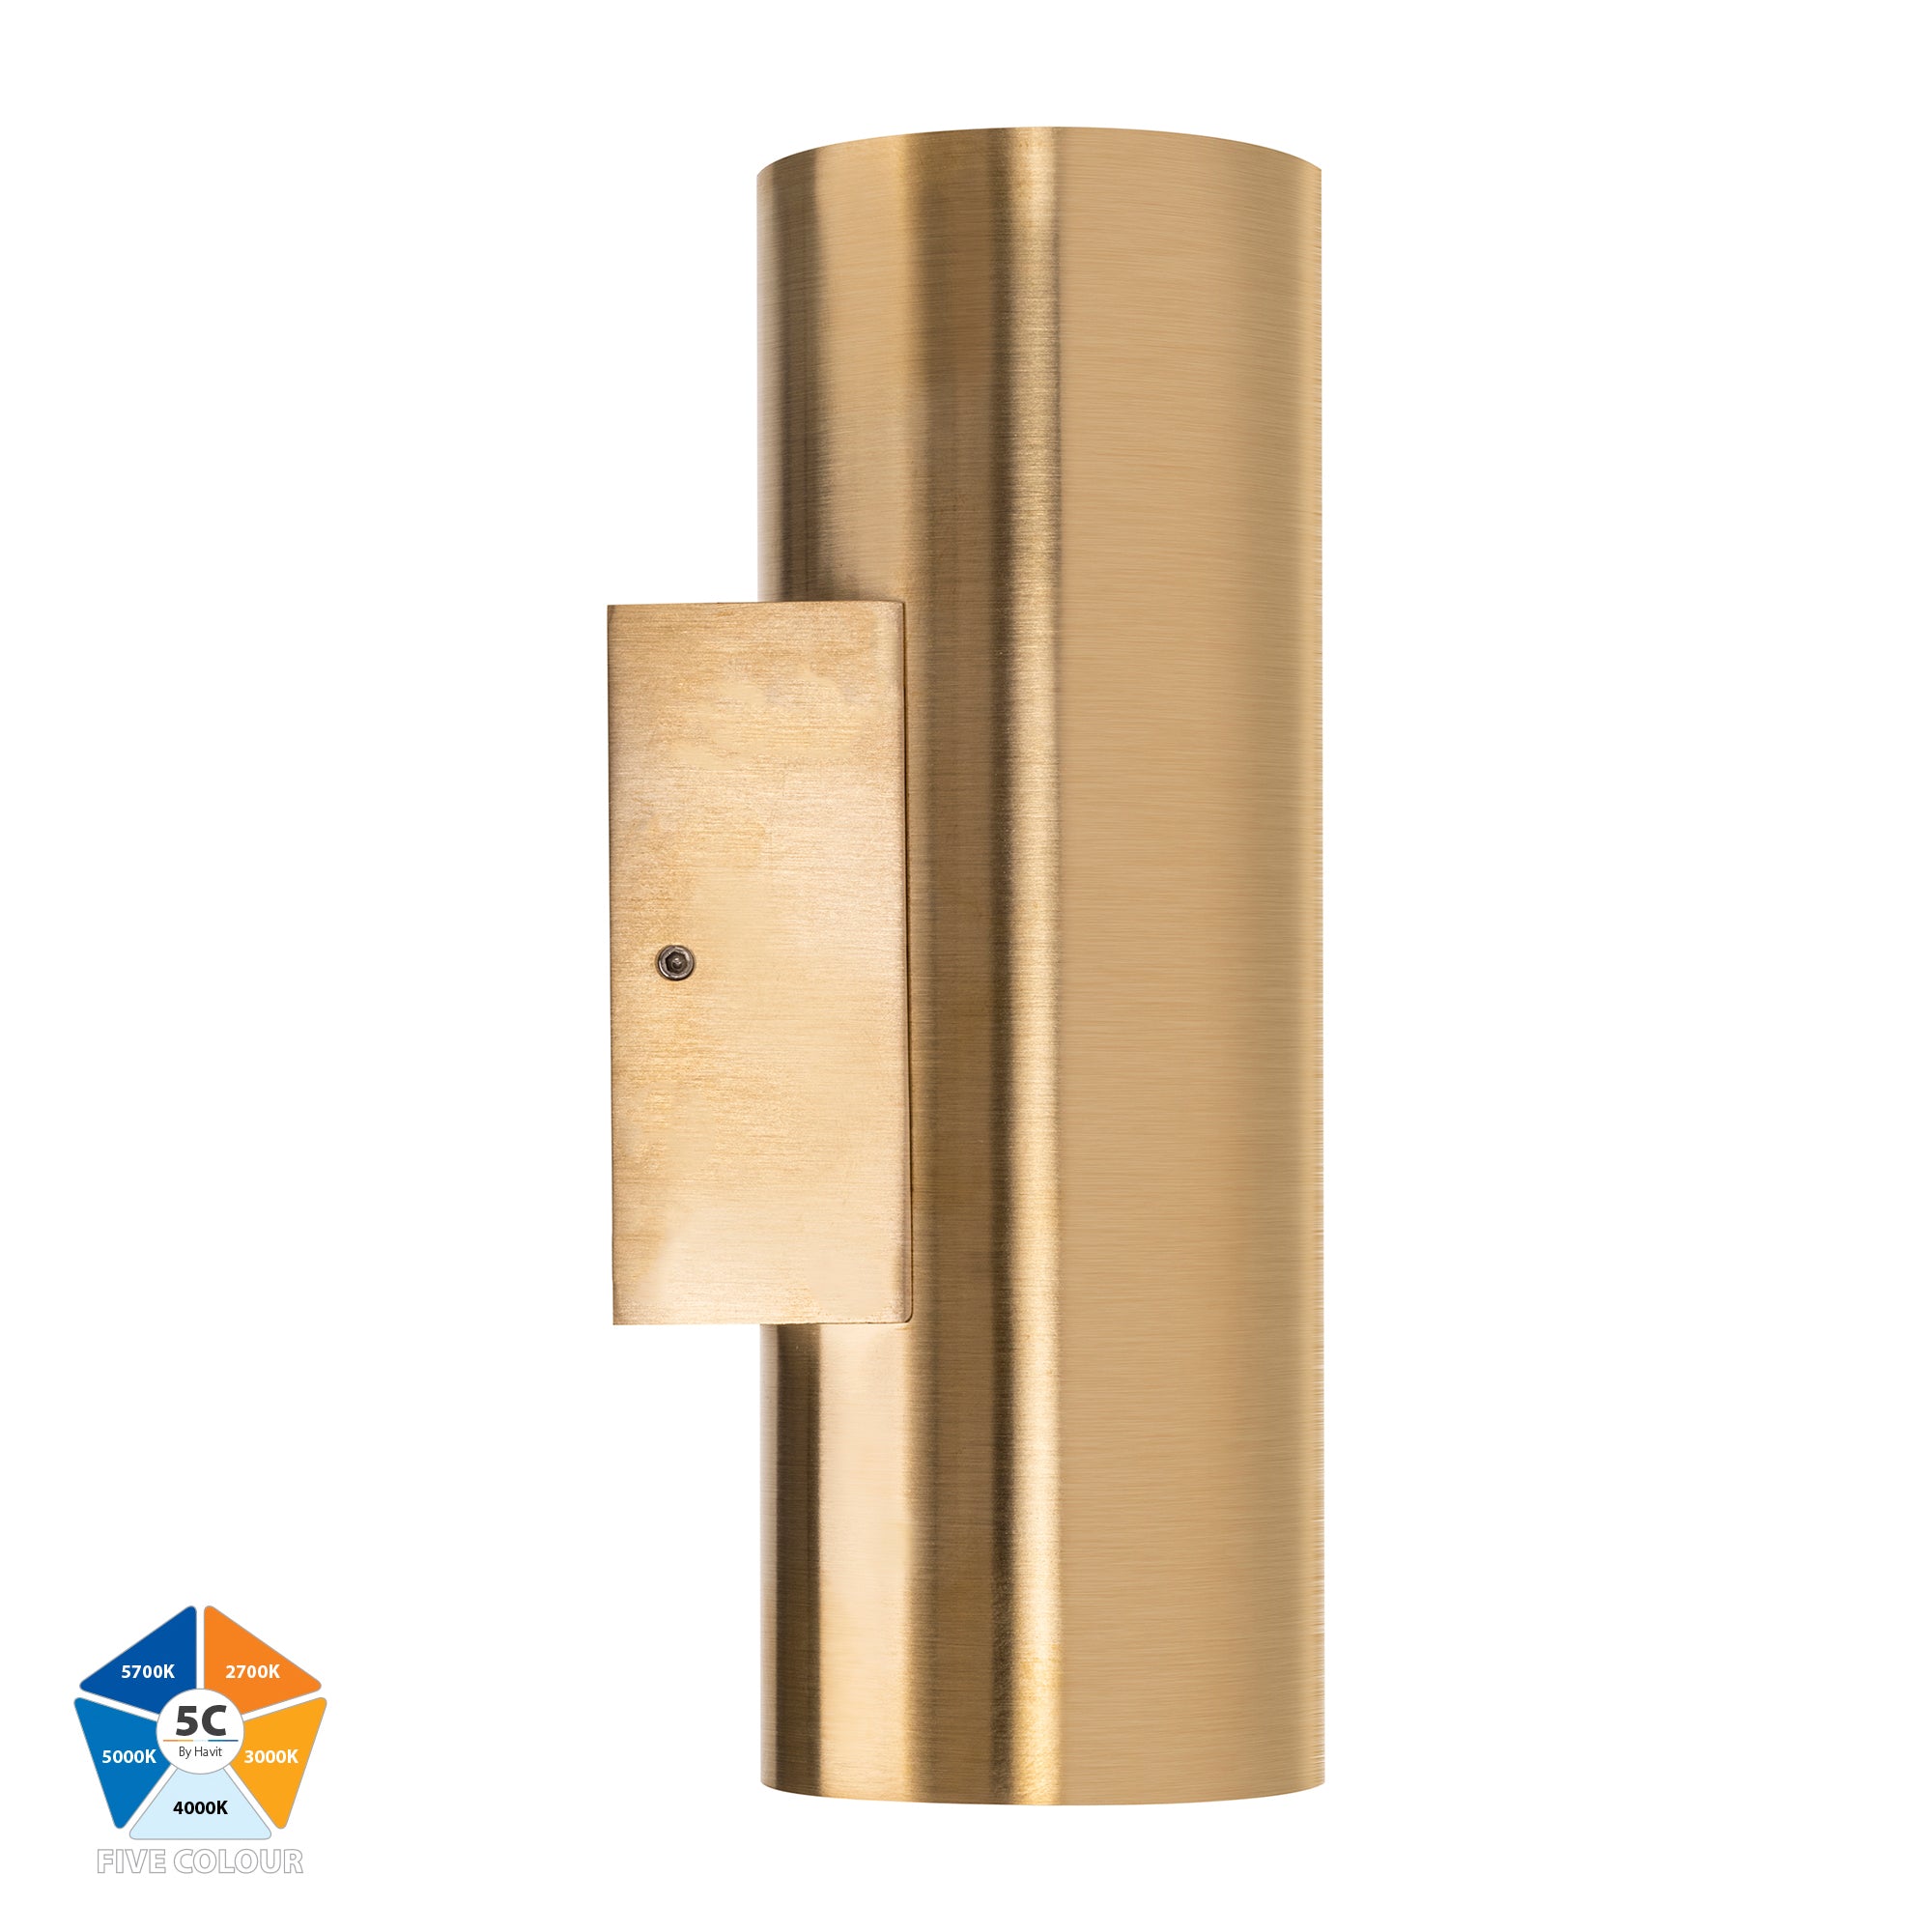 HV3626S-BR- Aries Solid Brass Up & Down LED Wall Light